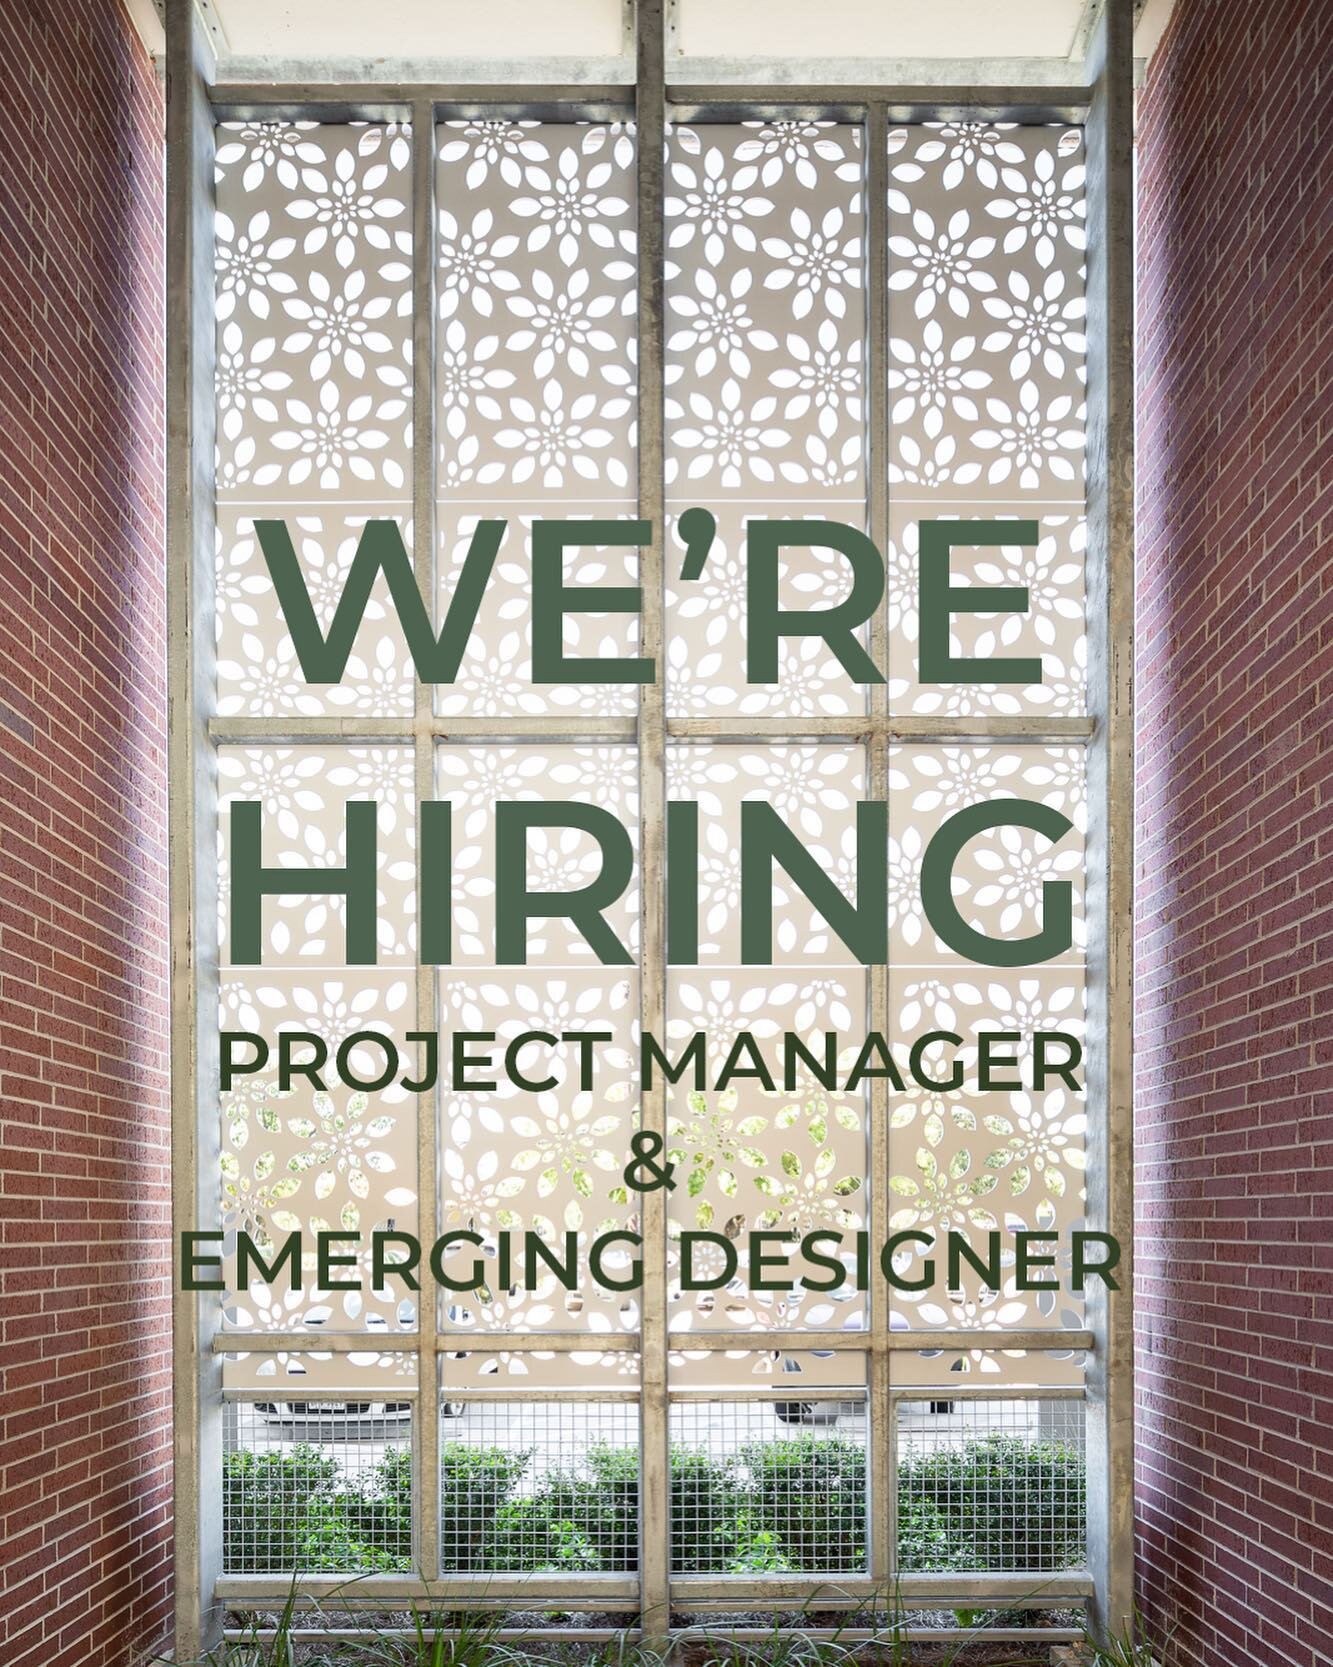 For more information on the Project Manager position, please visit the job listing at https://www.linkedin.com/jobs/view/3048246895/
All applicants should submit their resume and project experience to: info@gsmarchitects.net  #hiring